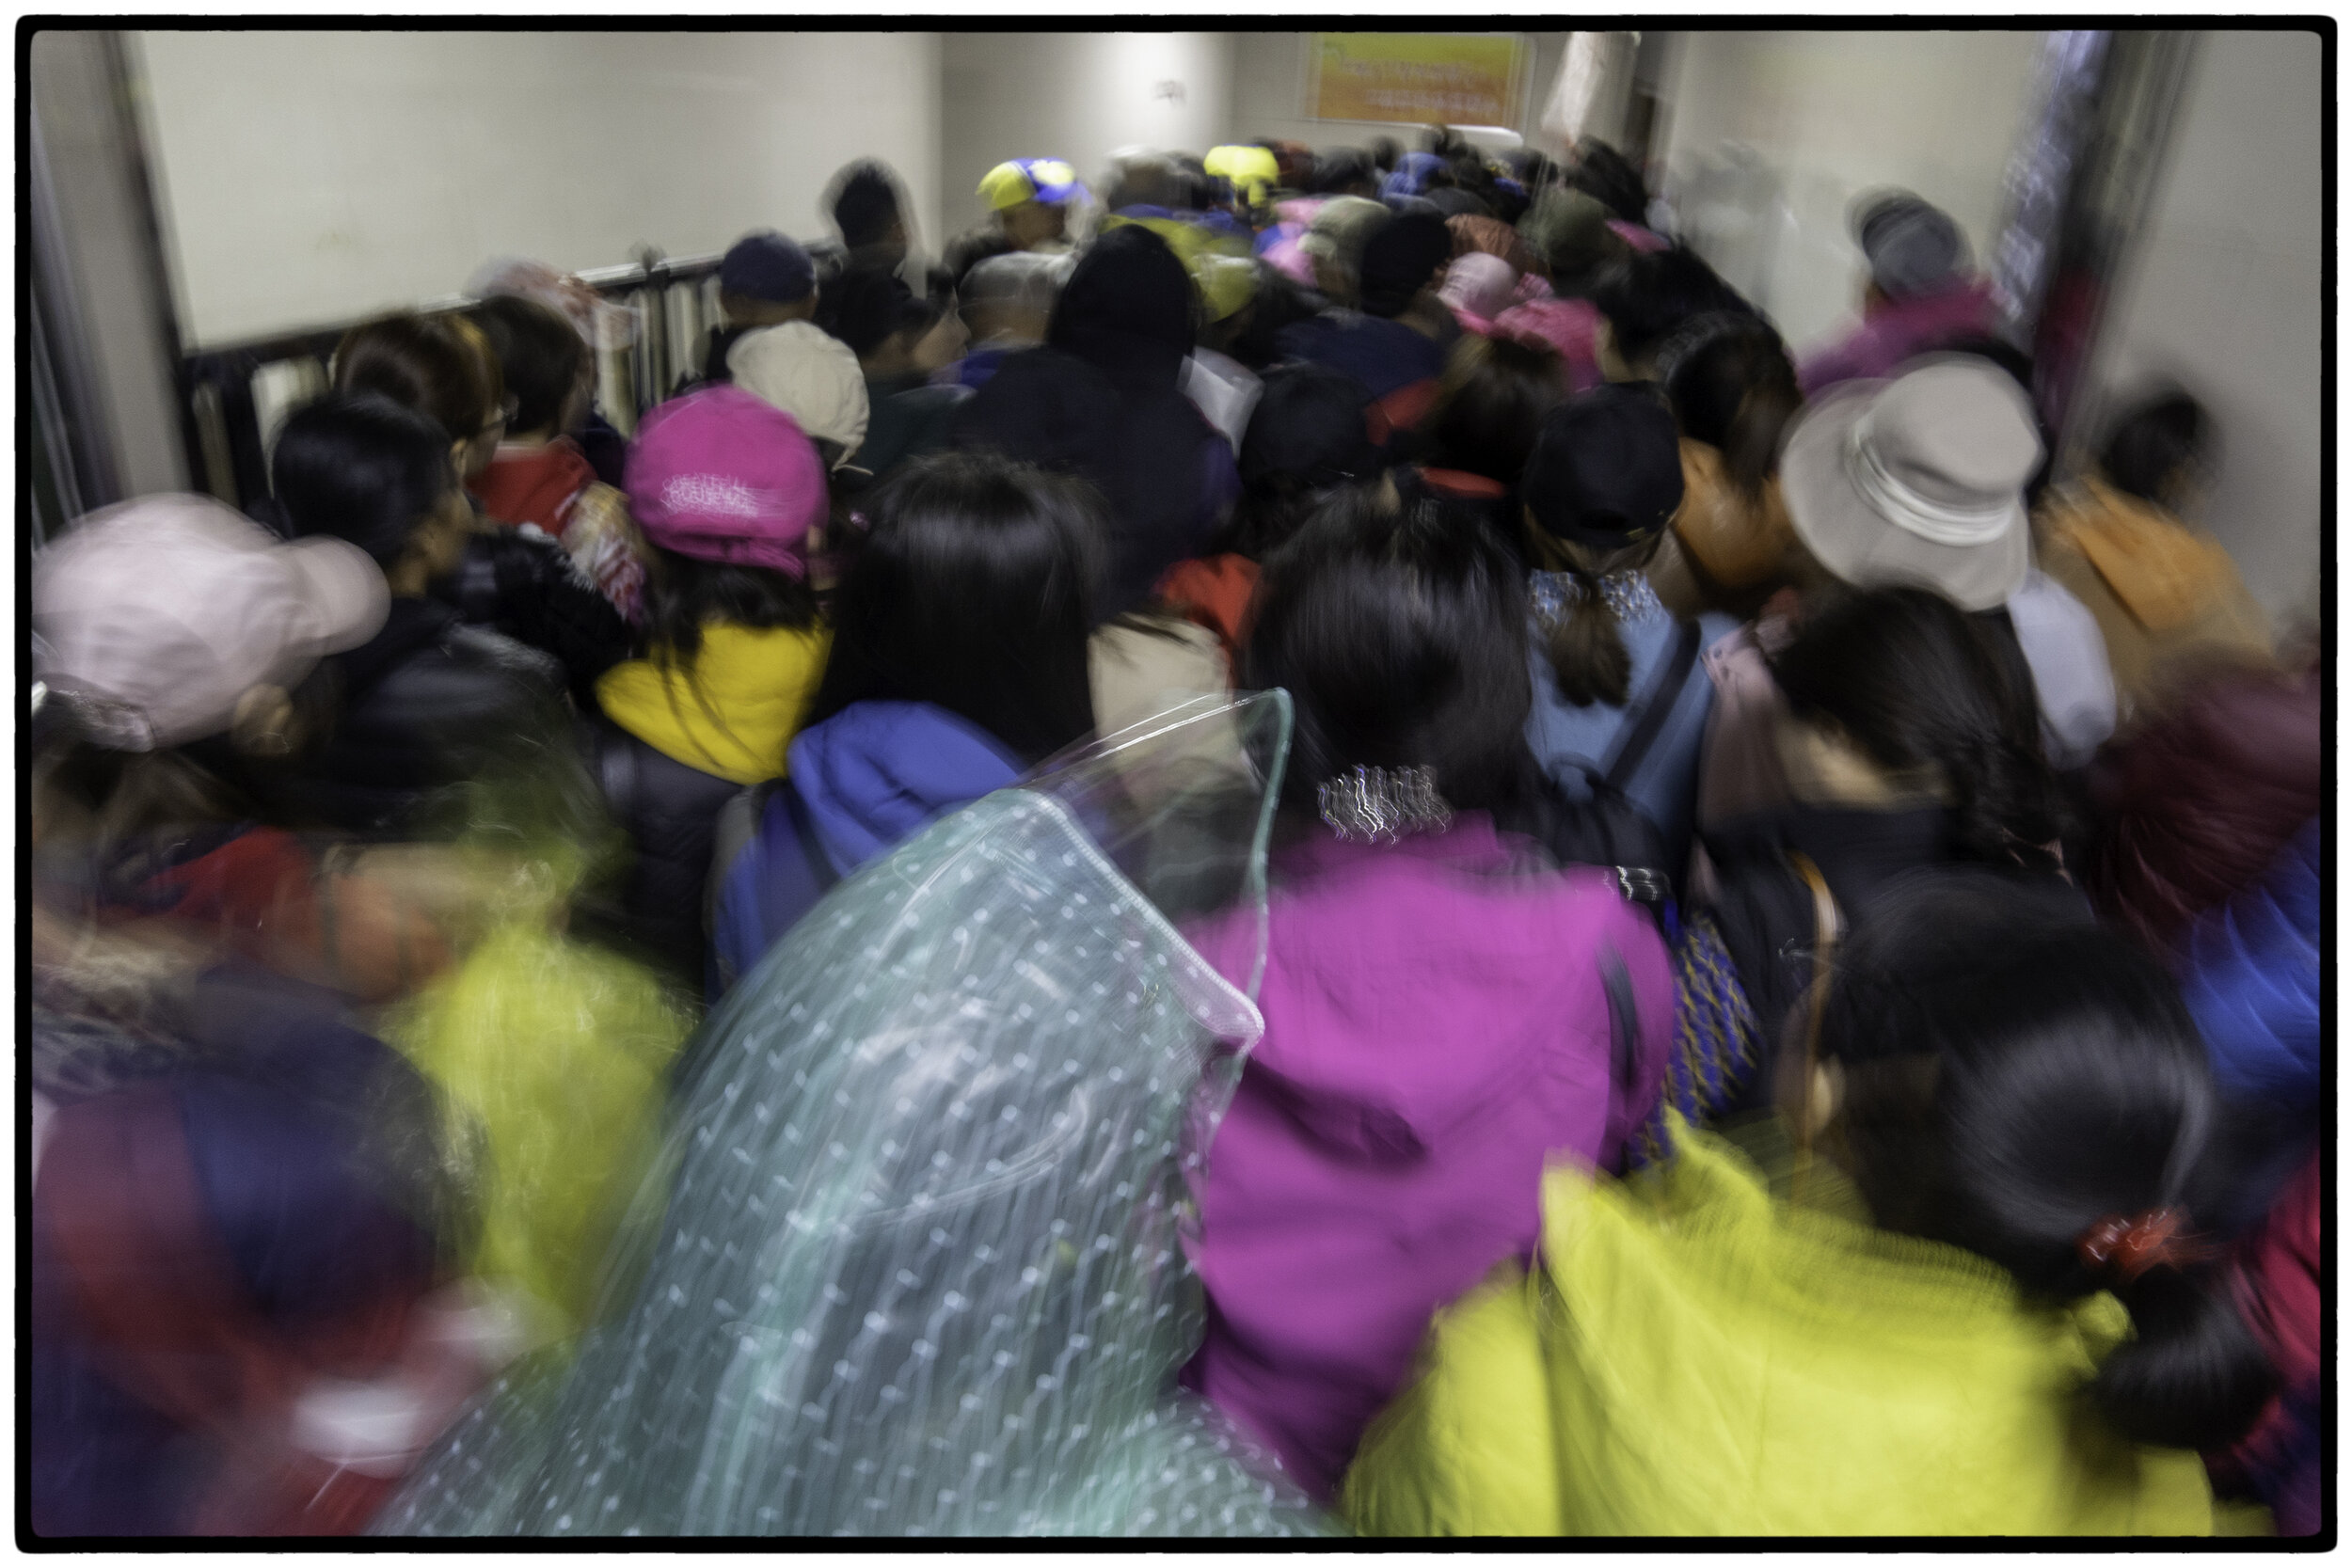 Single file lines in China are the norm